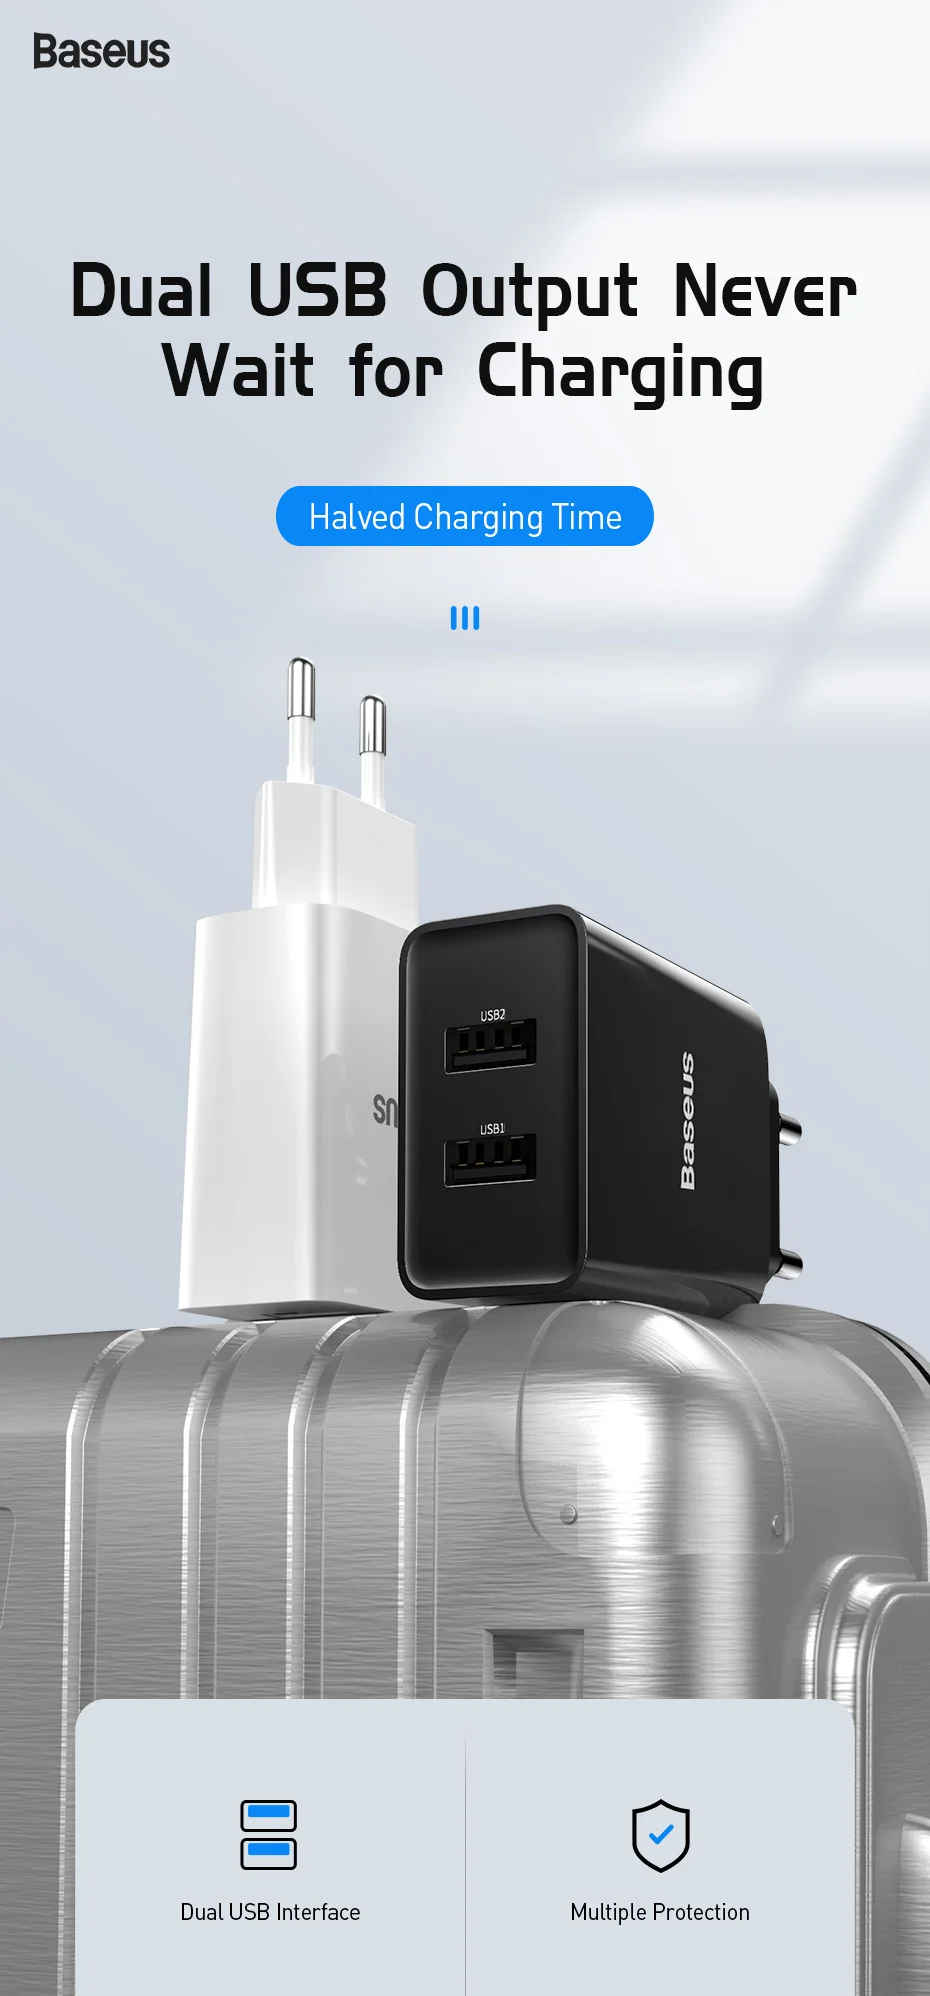 Baseus Portable Dual USB Charger 5V 2.1A For iPhone X 8 7 6 Charger EU Plug Fast Wall Charger for Samsung S8 Note 8 Xiaomi Mi 8 65 watt charger mobile